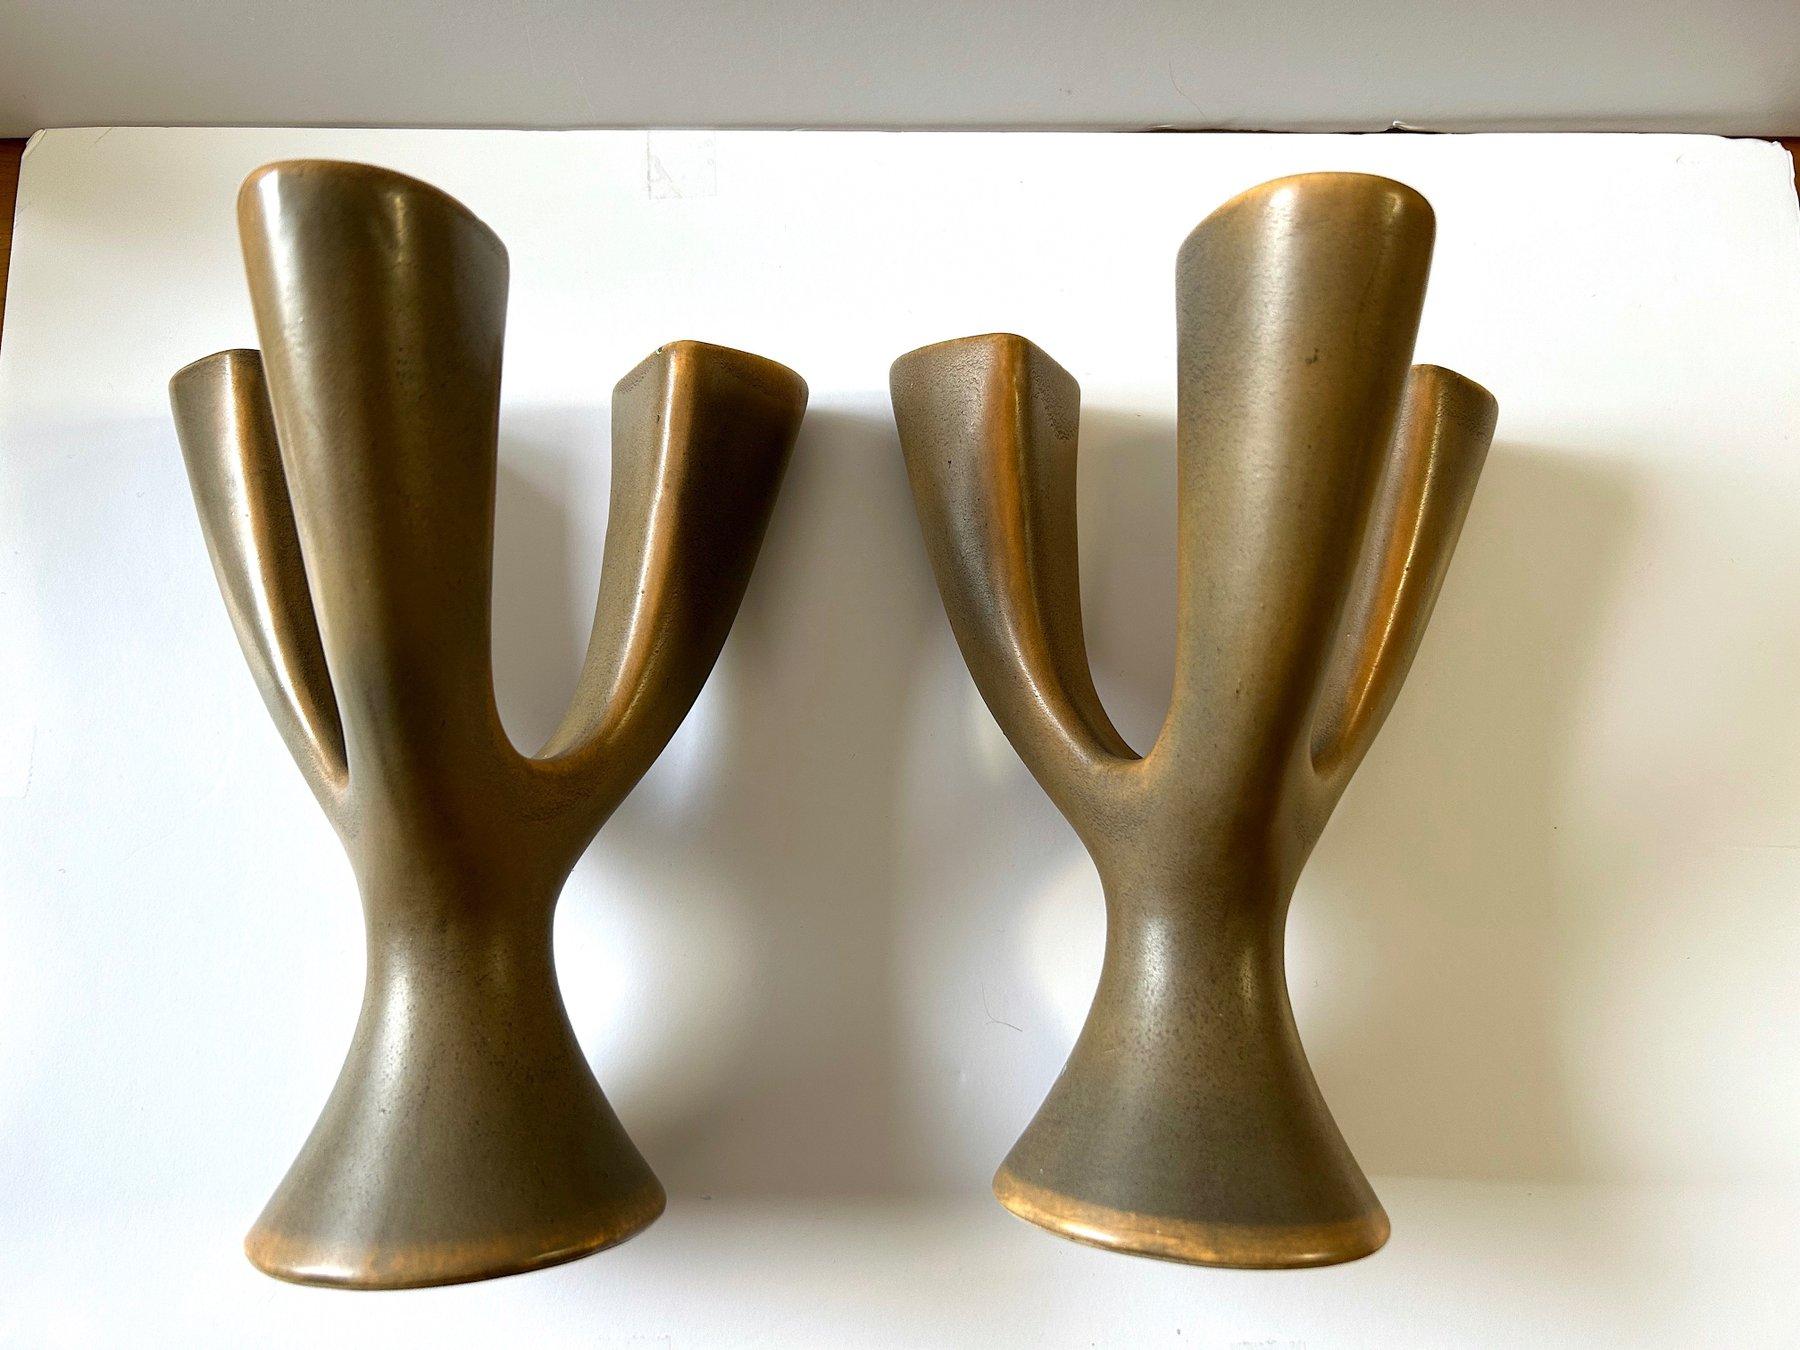 French Modernist St. Clement Ceramic Sapho Creation Candelabra's.  A pair of French Modernist Ceramic Candelabras Sapho Creation St. Clement France.  Organic form having three arms each with bronzed  glaze.  Nicely refined bold form in very good